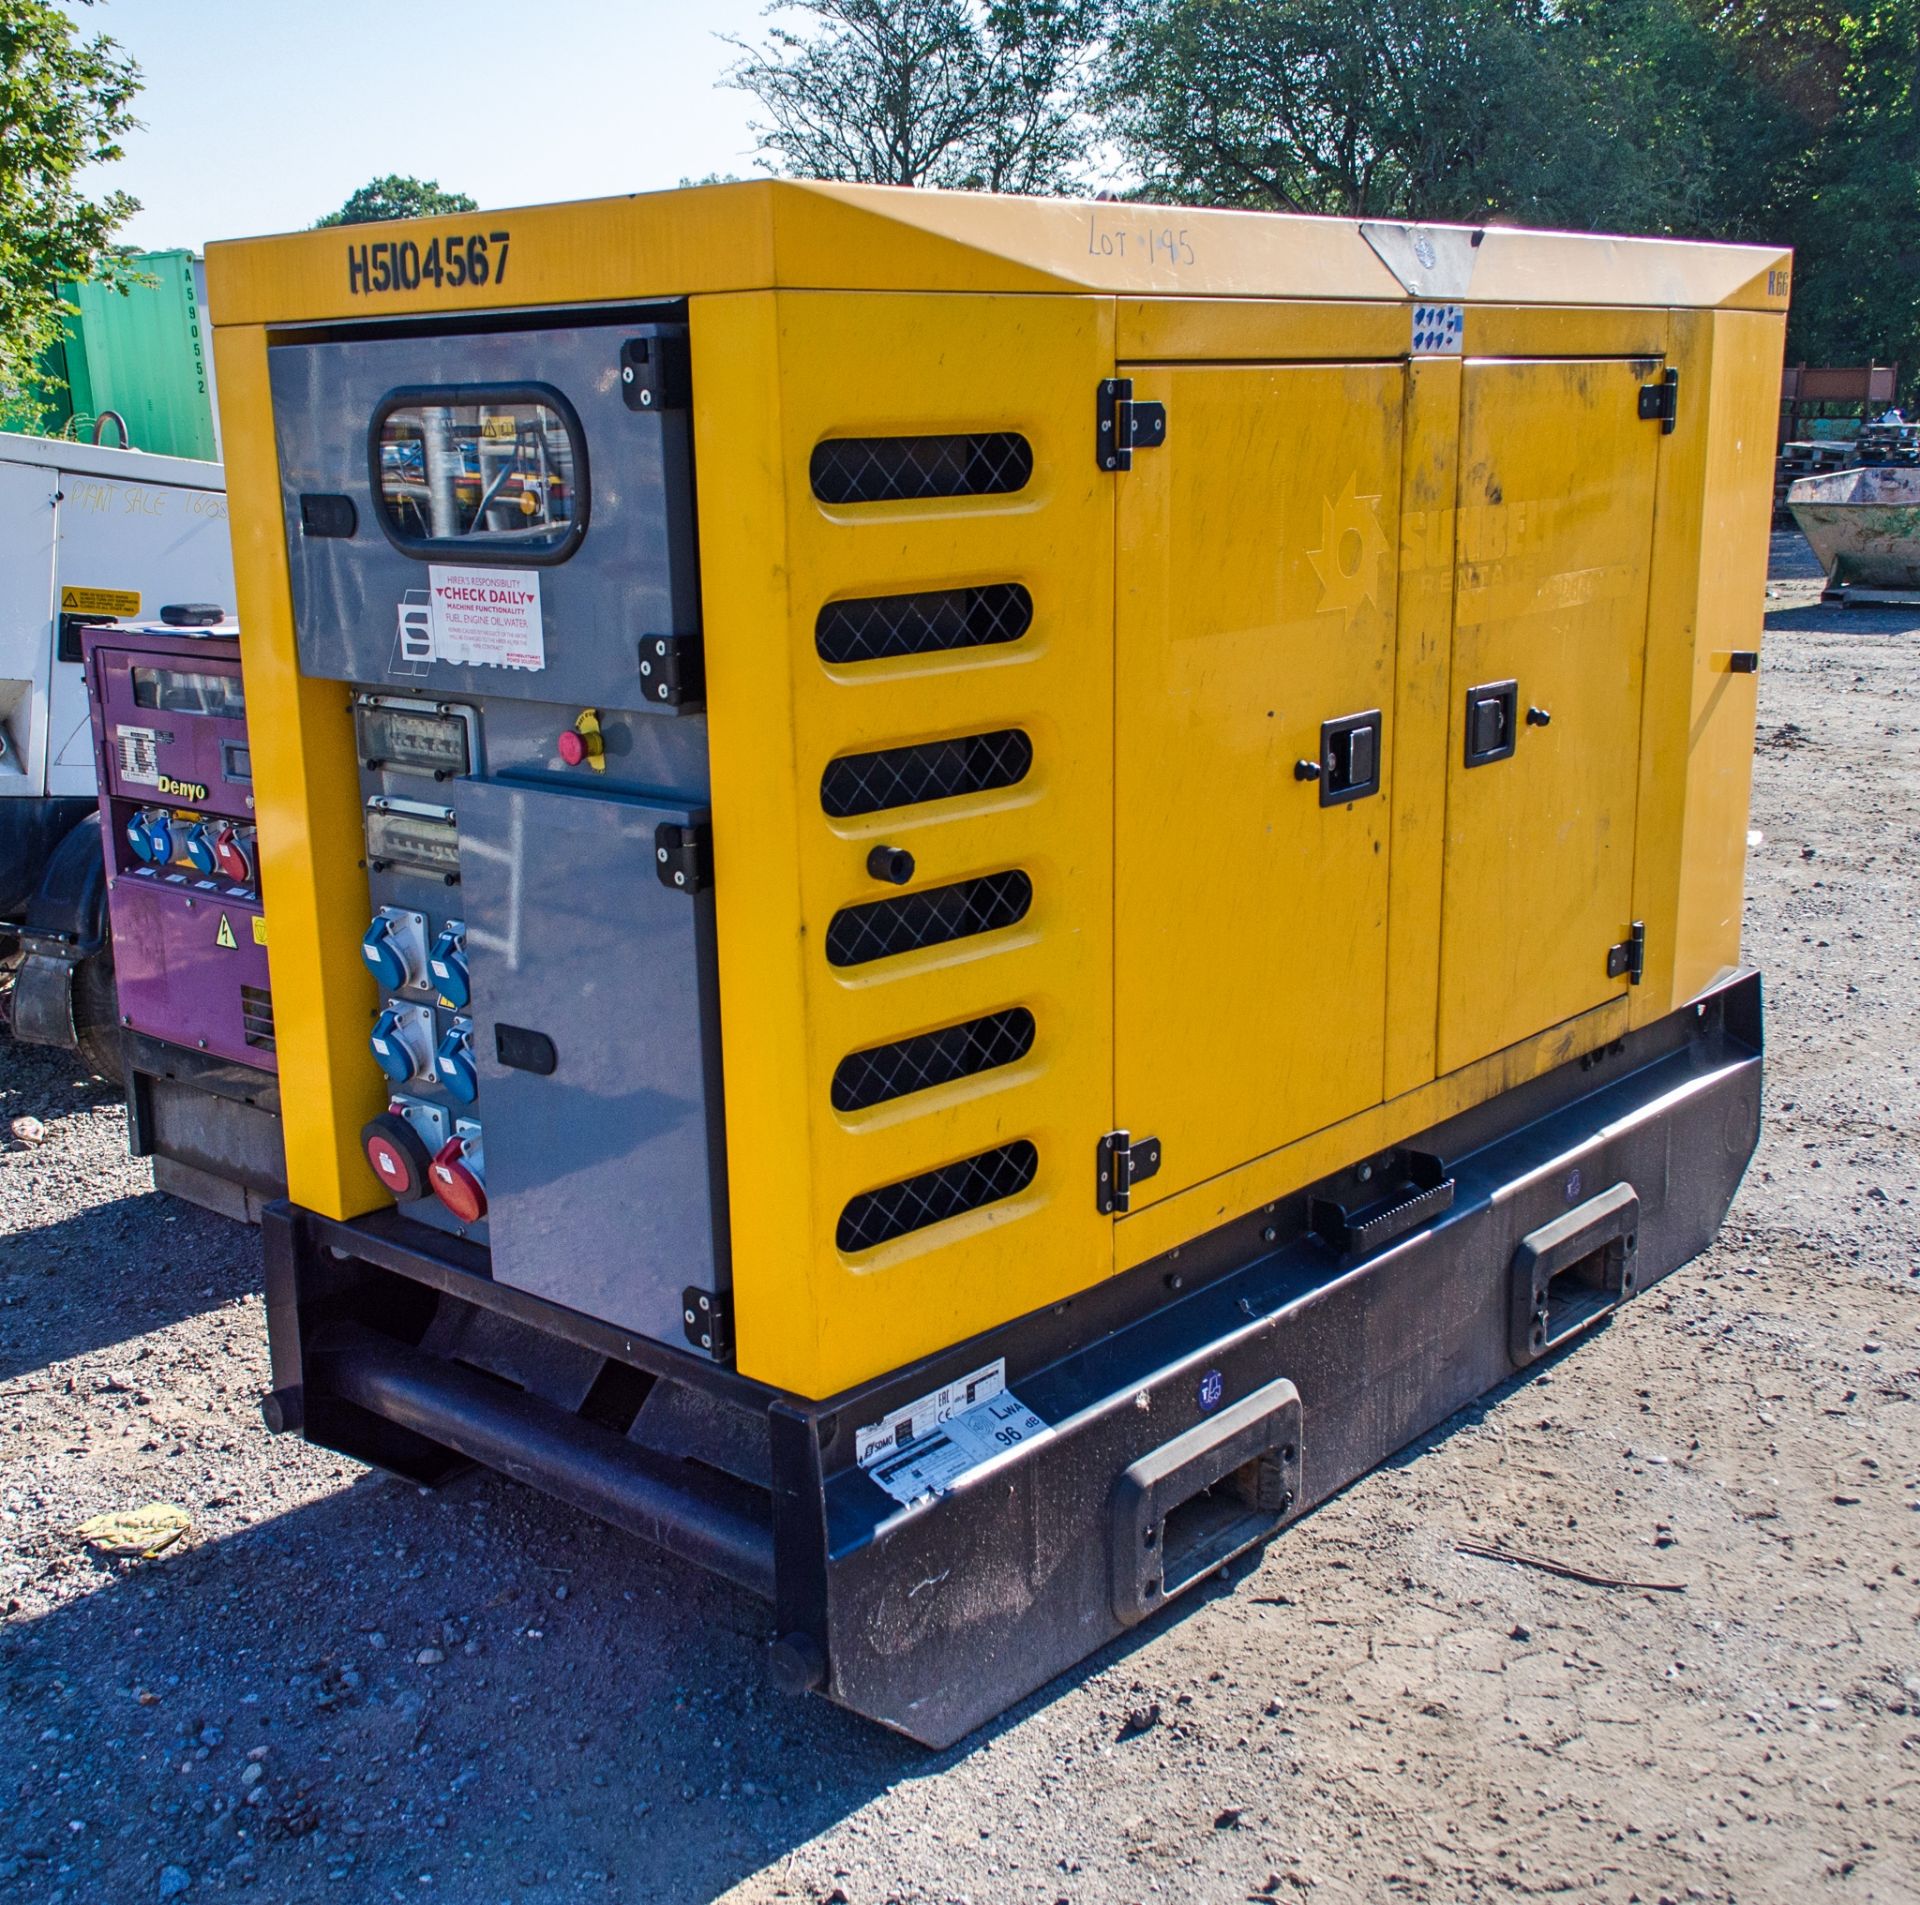 SDMO 60 kva diesel driven generator Year: 2015 S/N 3526 ** Parts missing ** H5104567 Weight: 2040